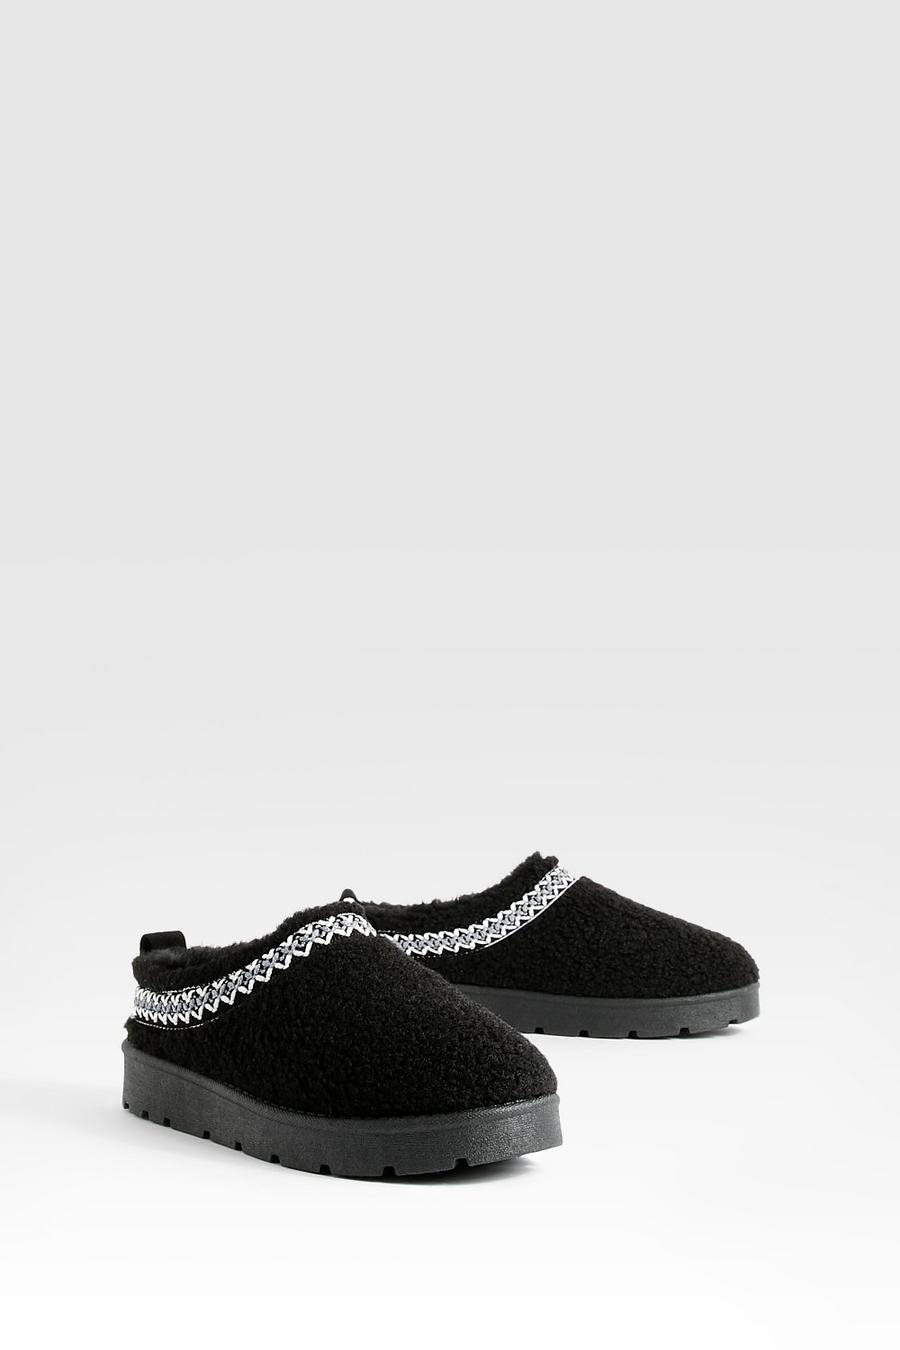 Black Embroidered Detailing Borg Slip On Cozy Mules image number 1